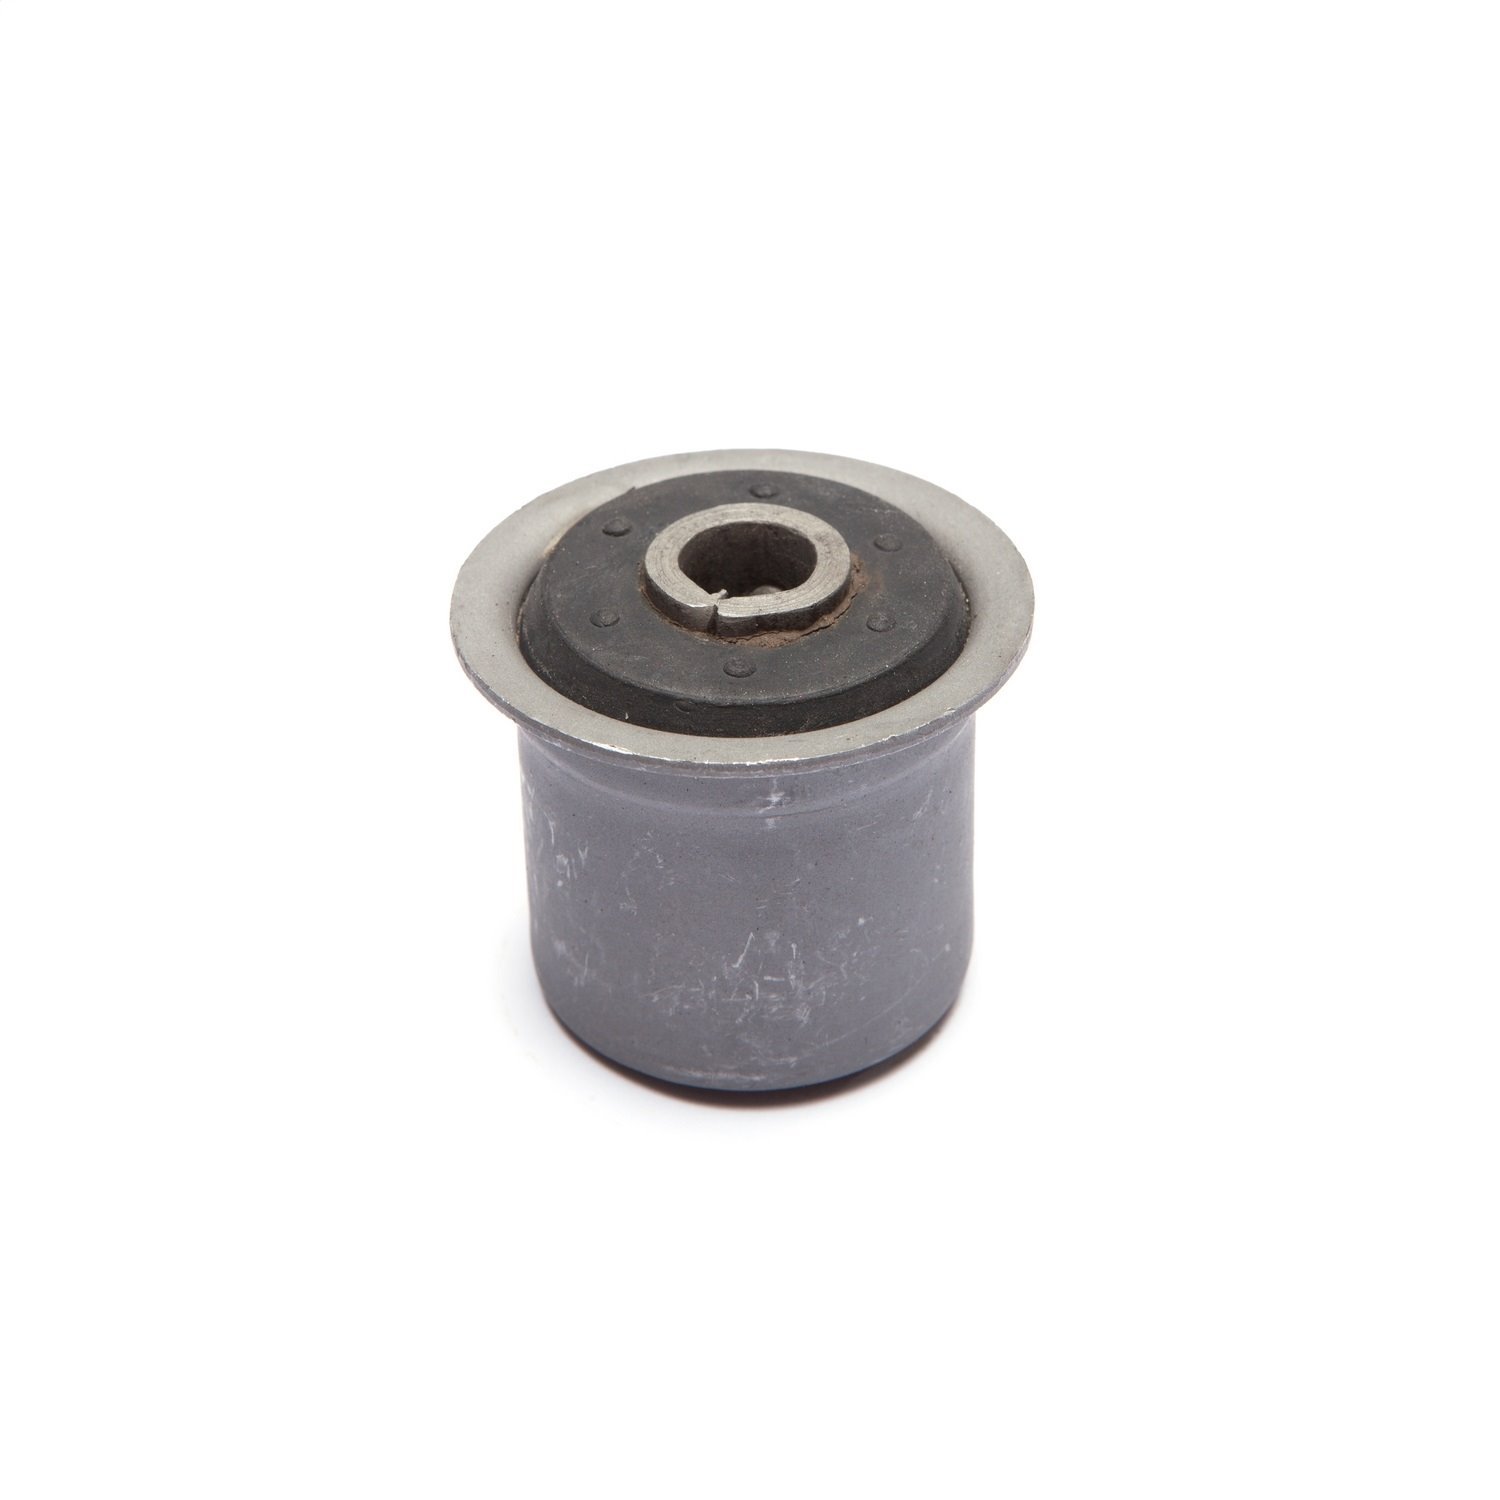 Stock replacement upper control arm bushing from Omix-ADA, Fits either end of front upper co